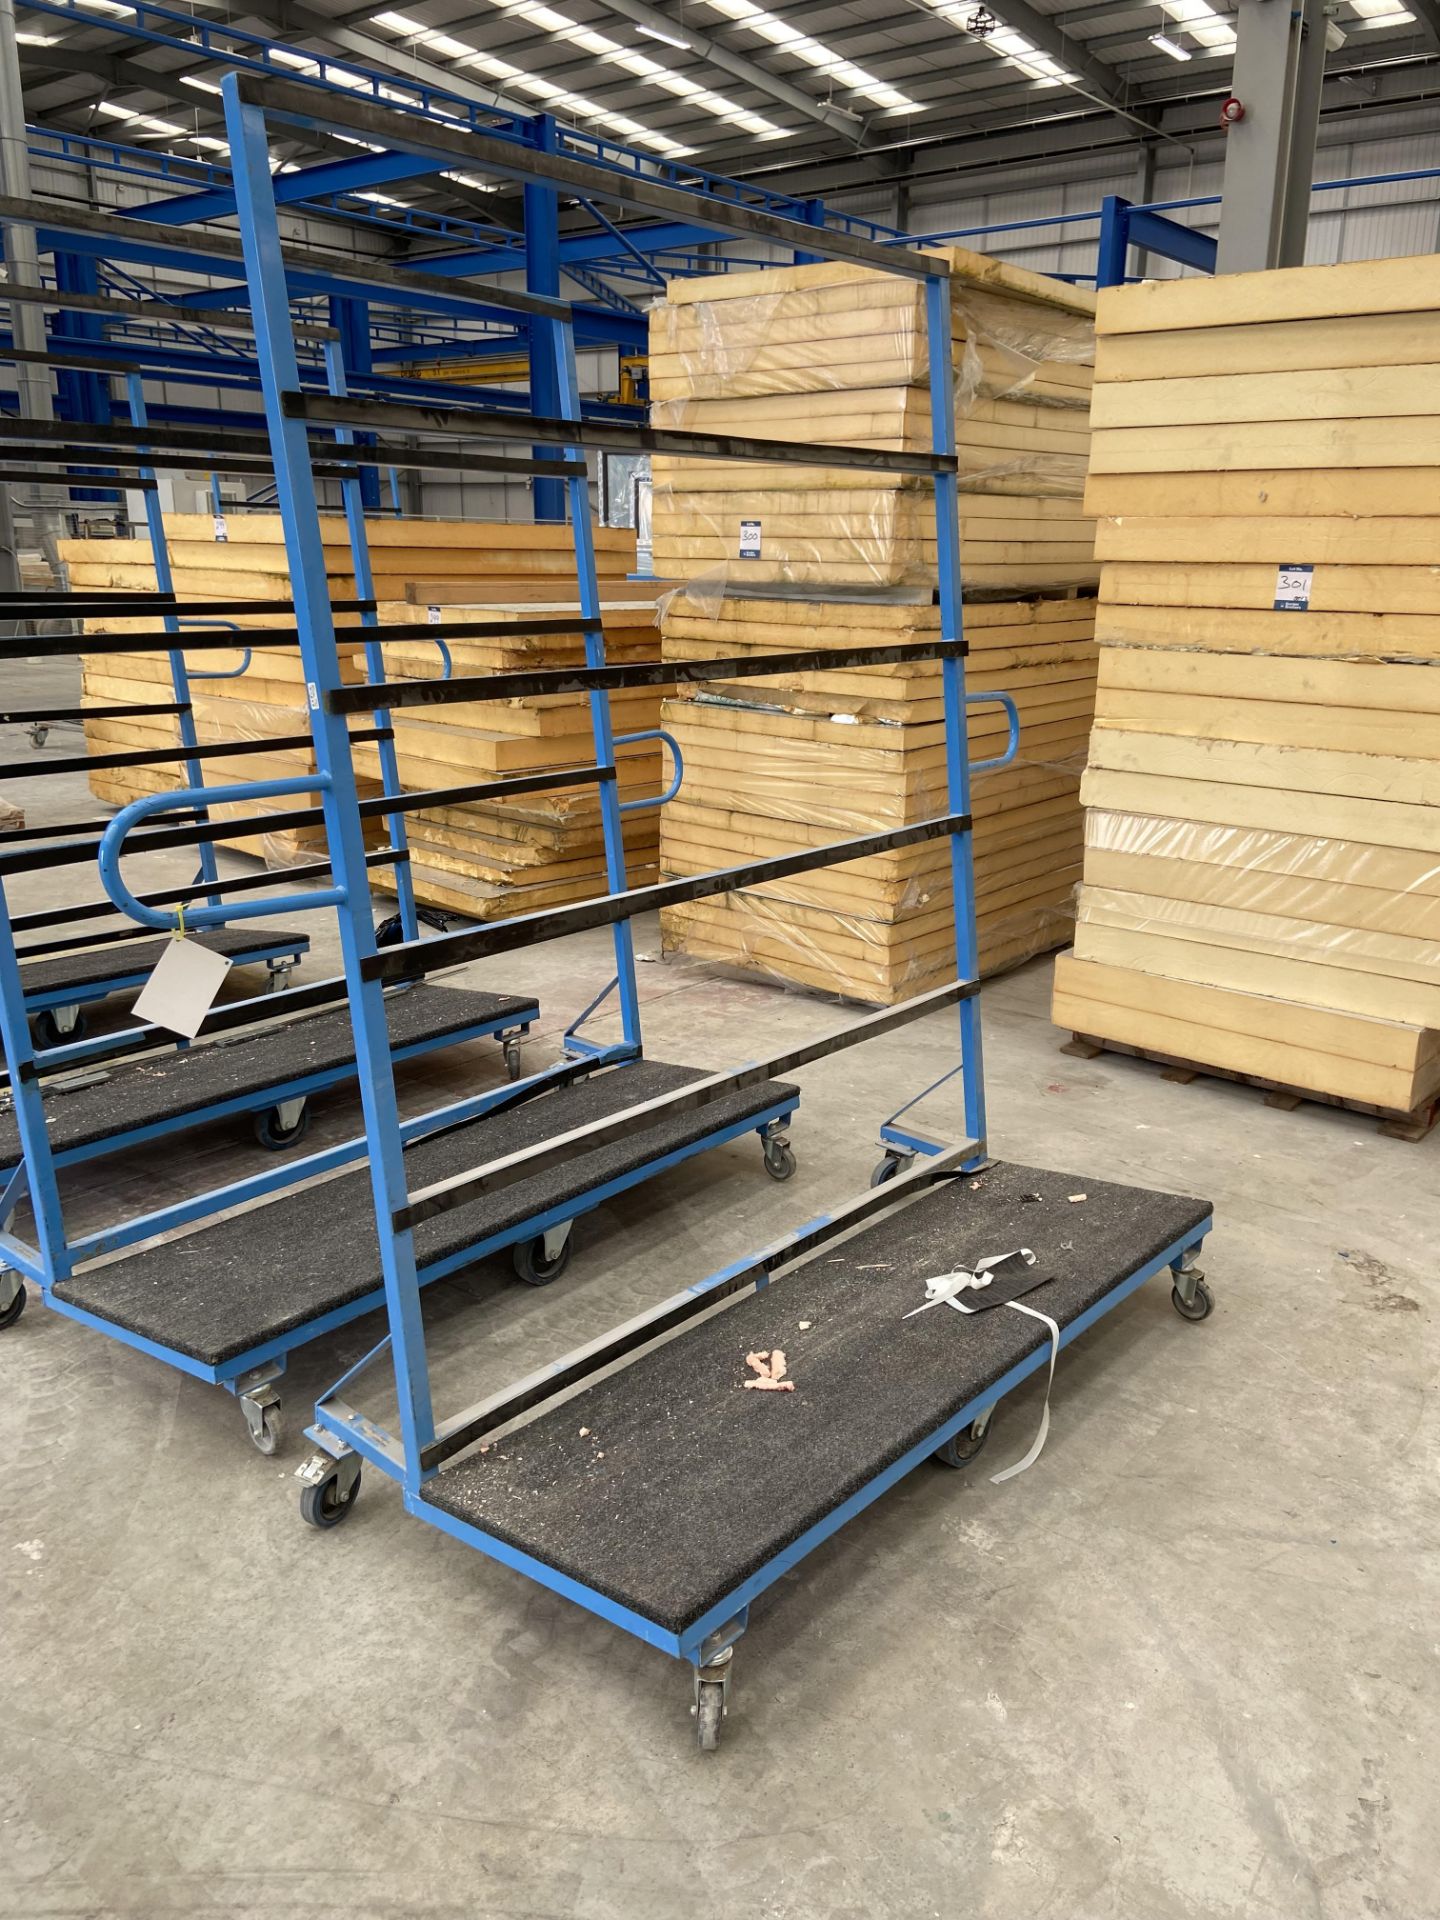 4 x Steely mobile panel rack with carpeted base SWL 500kg, previously used for glass - Image 2 of 5